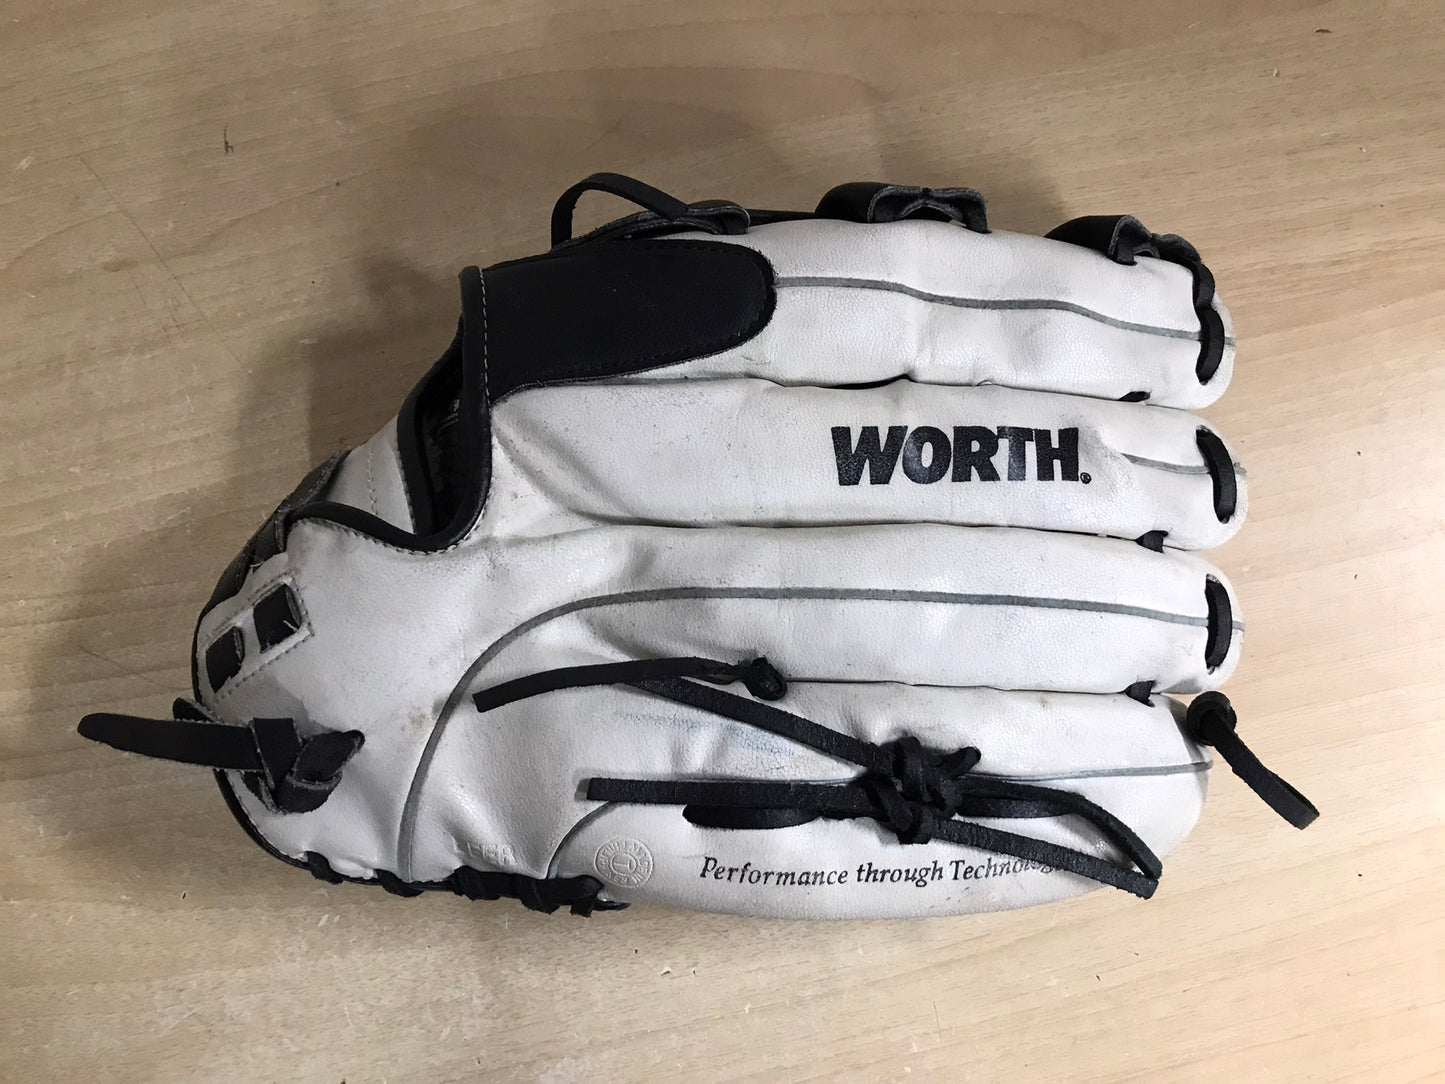 Baseball Glove Adult Size 13 inch Worth Black White Leather Fits on RIGHT Hand